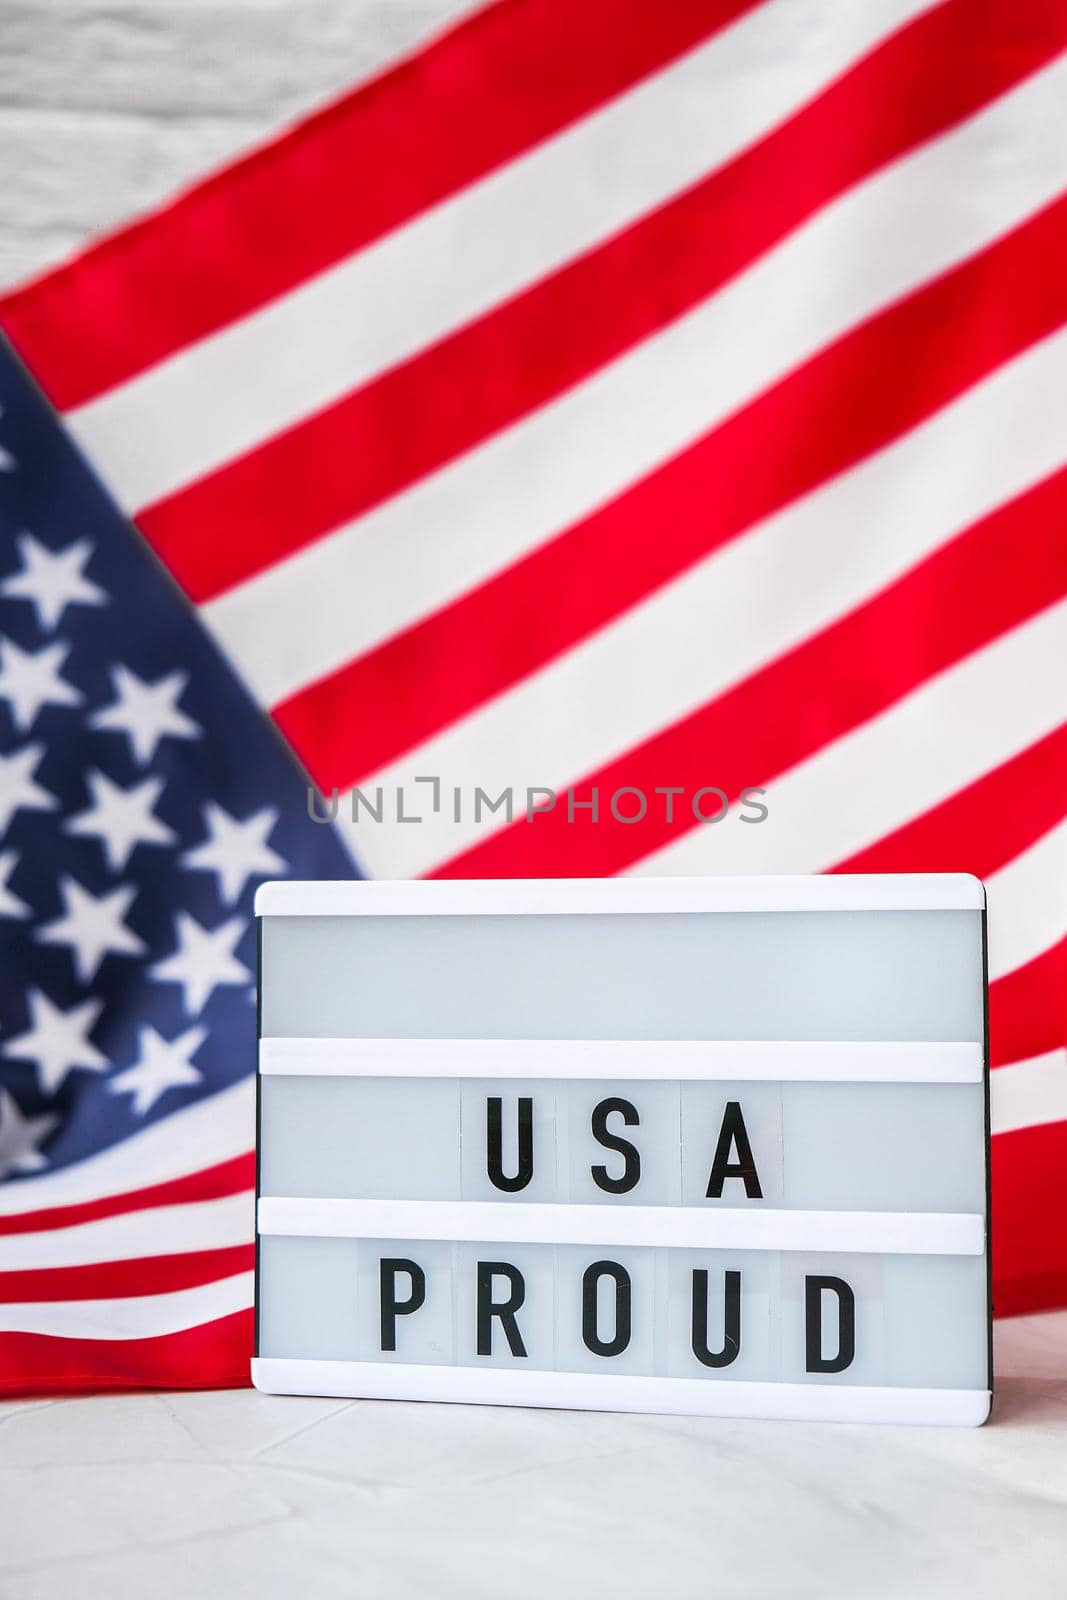 American flag. Lightbox with text USA PROUD Flag of the united states of America. July 4th Independence Day. USA patriotism national holiday. Usa proud. Freedom concept